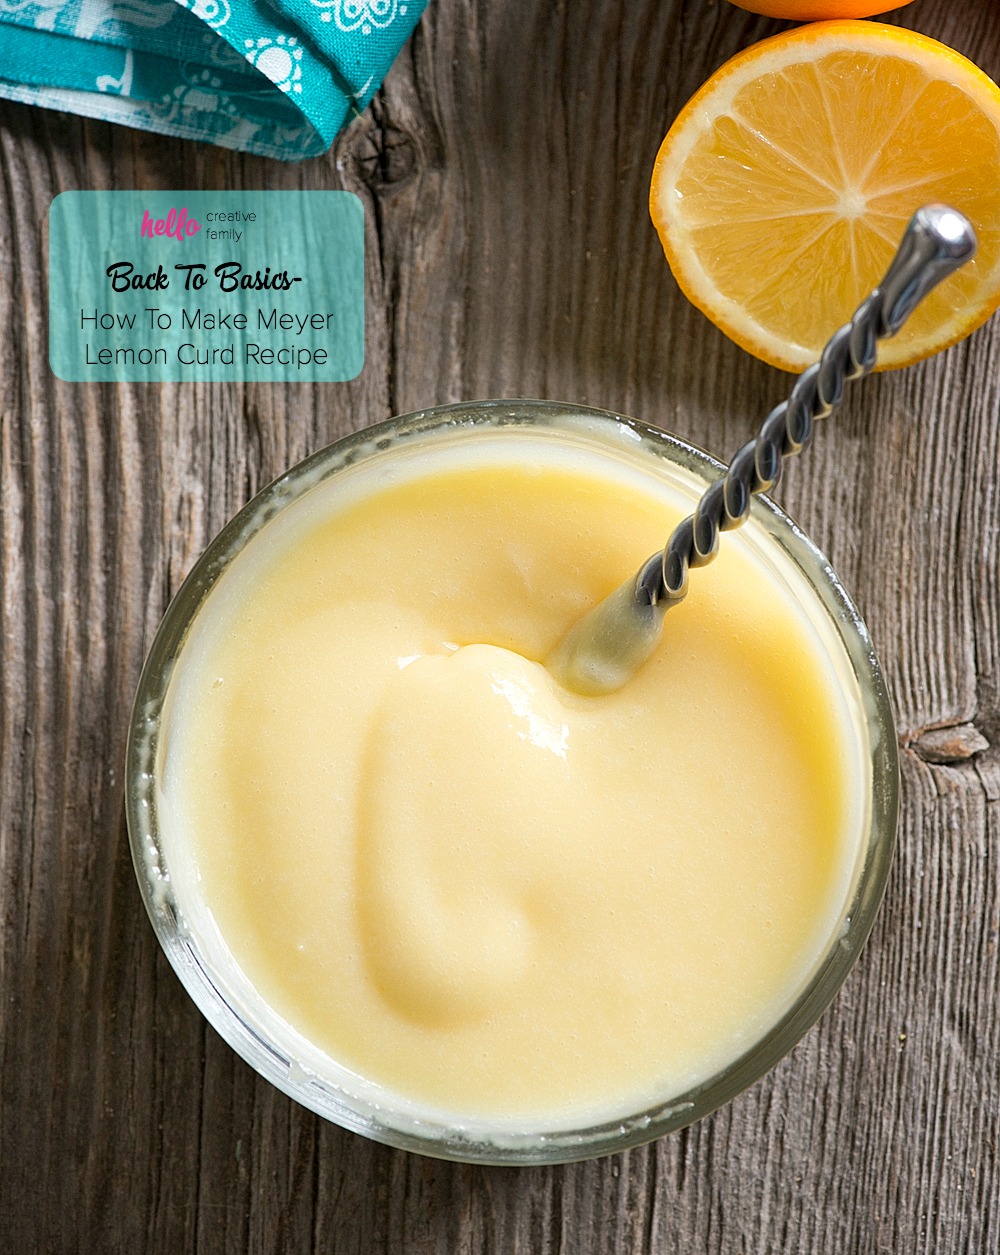 Homemade lemon curd is a delicious topping for scones, biscuits and cakes. Do you know that it's easy to make? In Hello Creative Family's newest Back To Basics article they share the simple steps for how to make meyer lemon curd recipe!